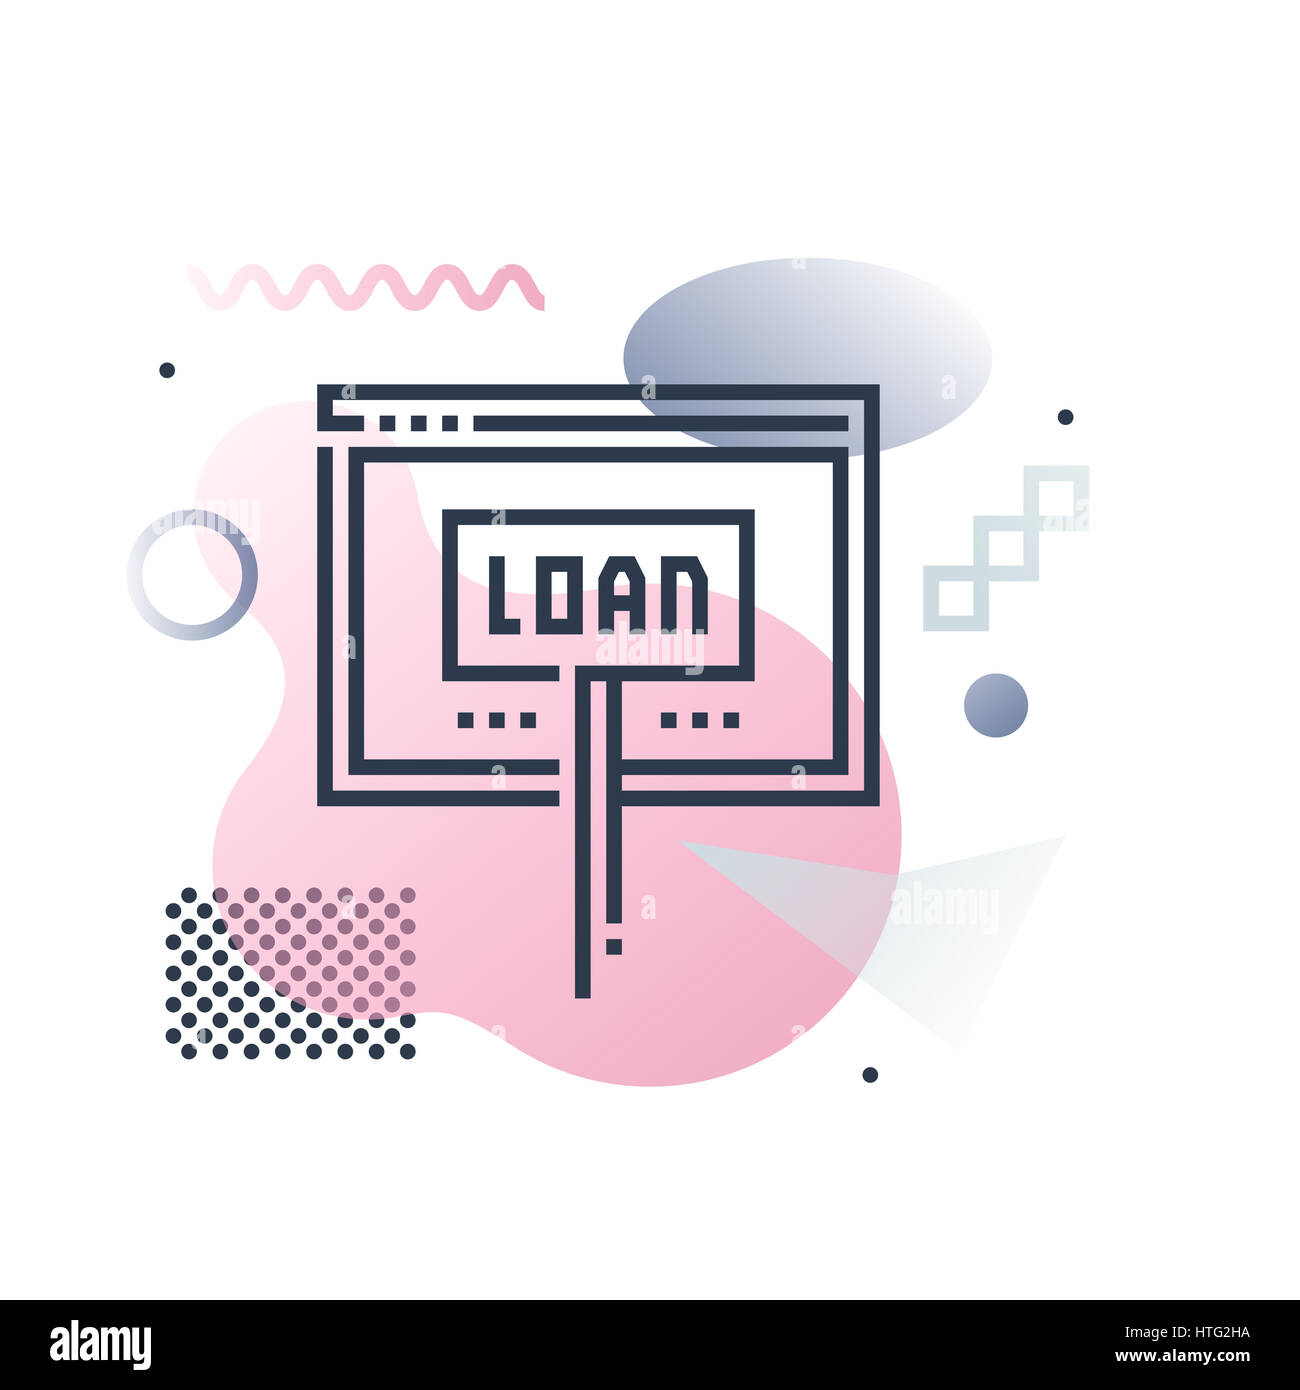 Online loan service, internet website of financial aid. Abstract illustration concept. Stock Photo